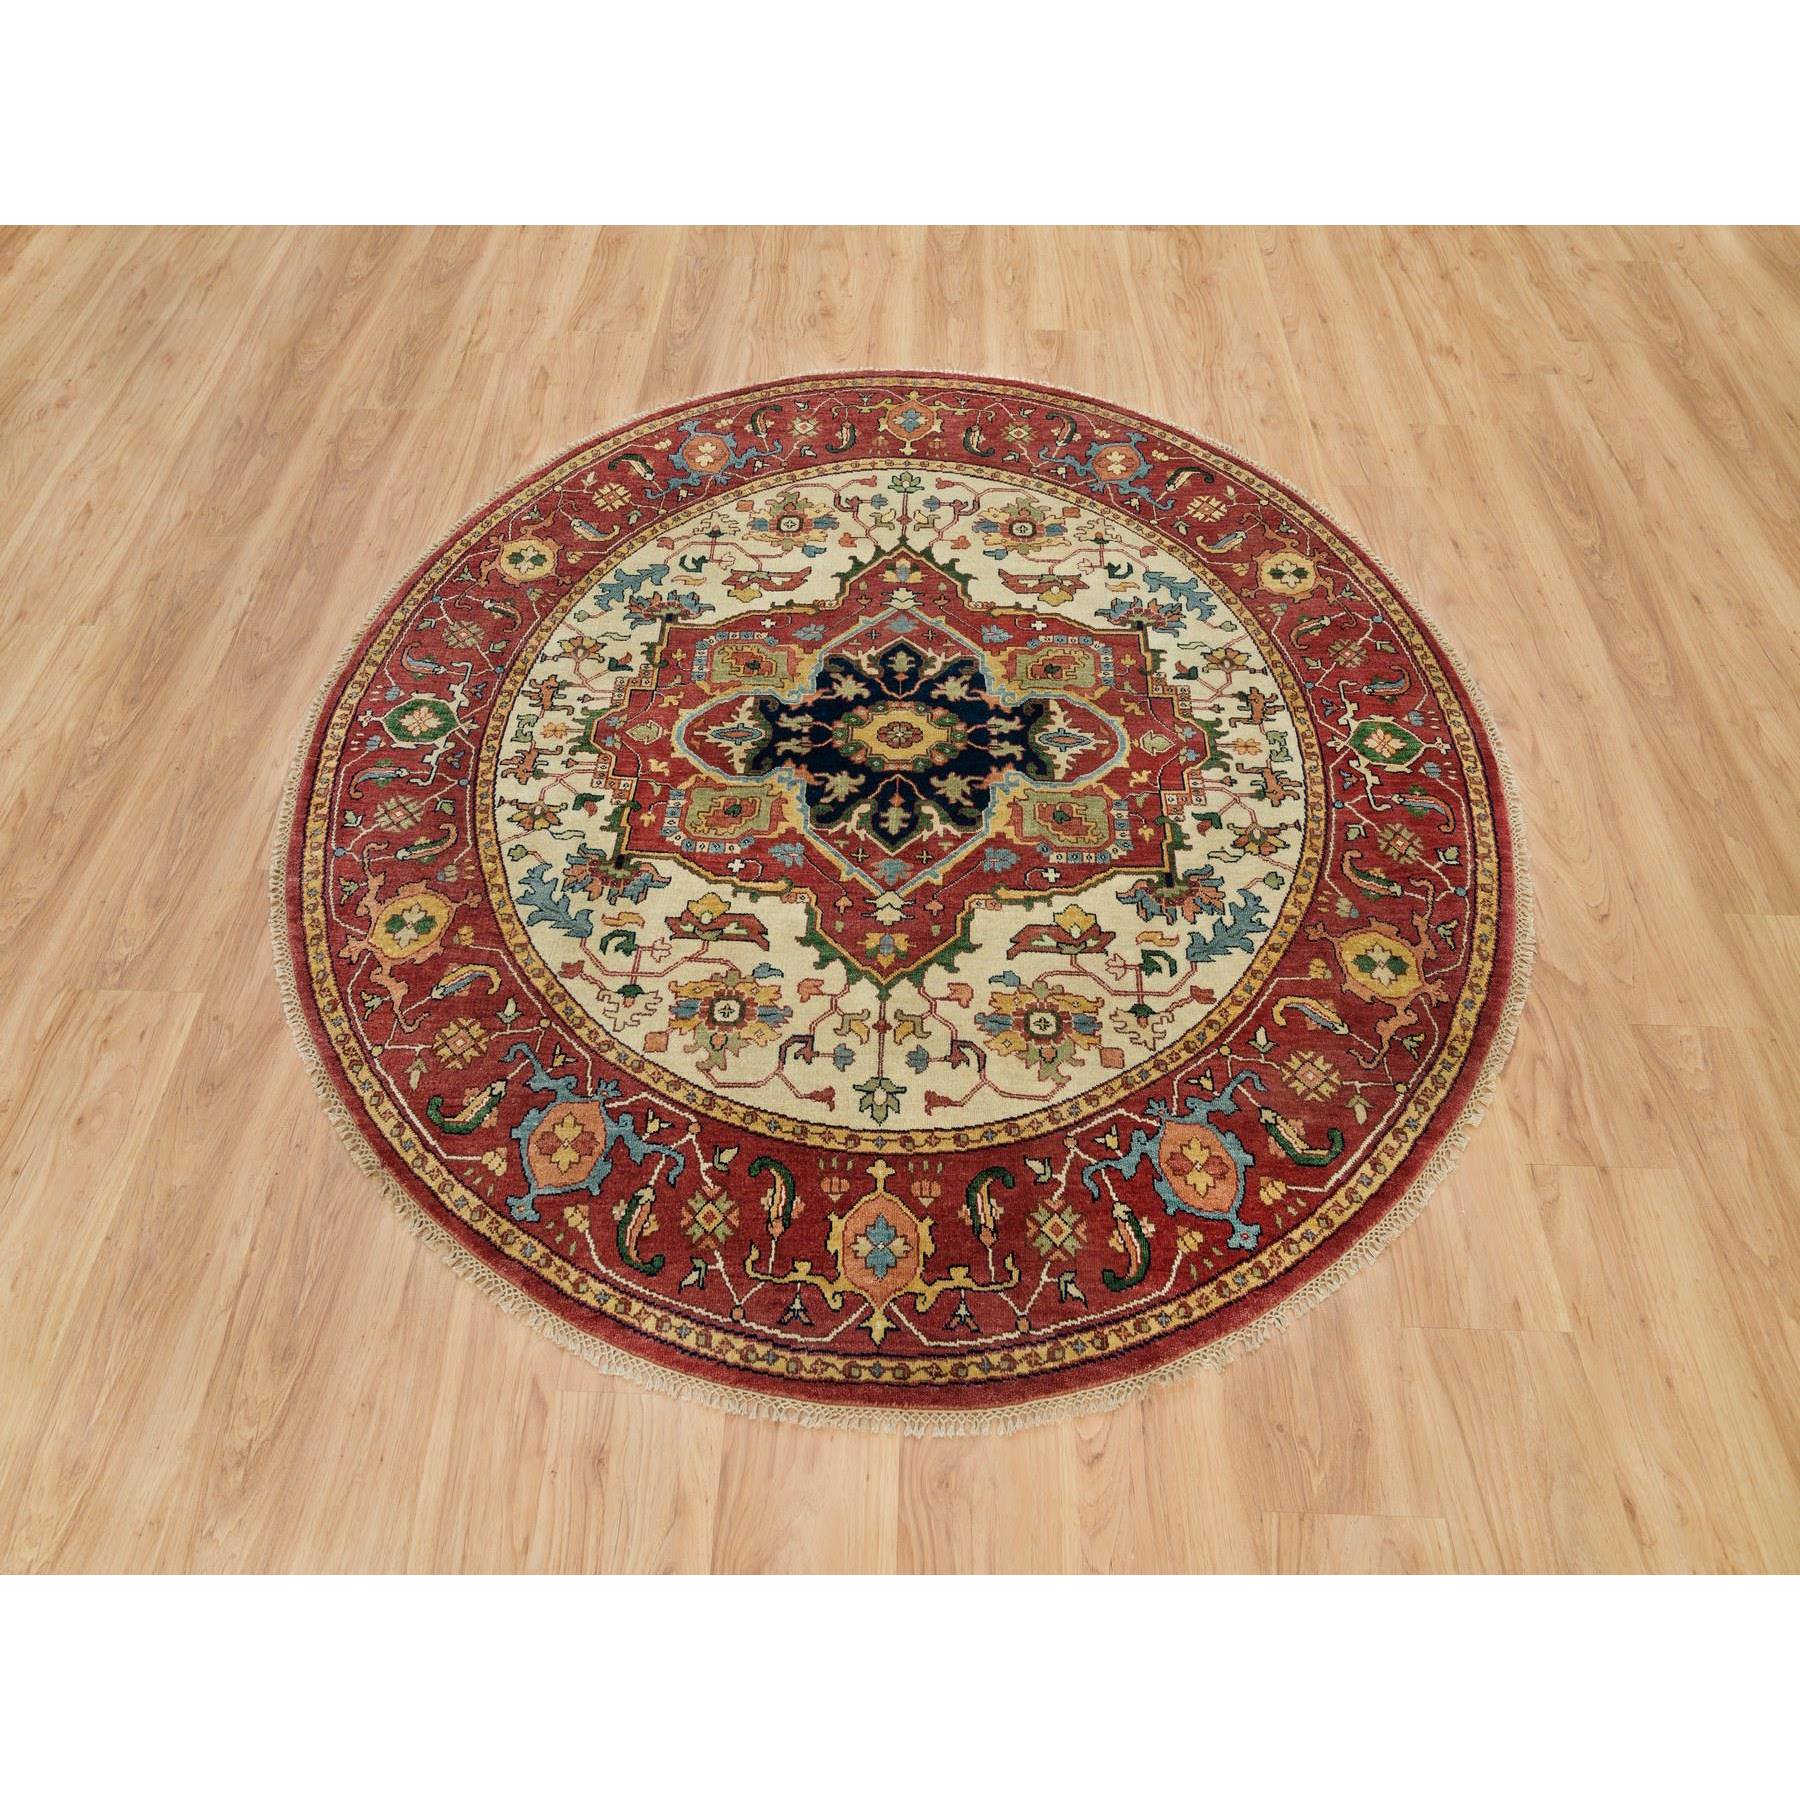 6'x6' Abbey White and Prune Red, Dense Weave, Lush Pile, Vegetable Dyes, Antiqued Fine Hand Woven Heriz Re-Creation, Round Oriental Rug 